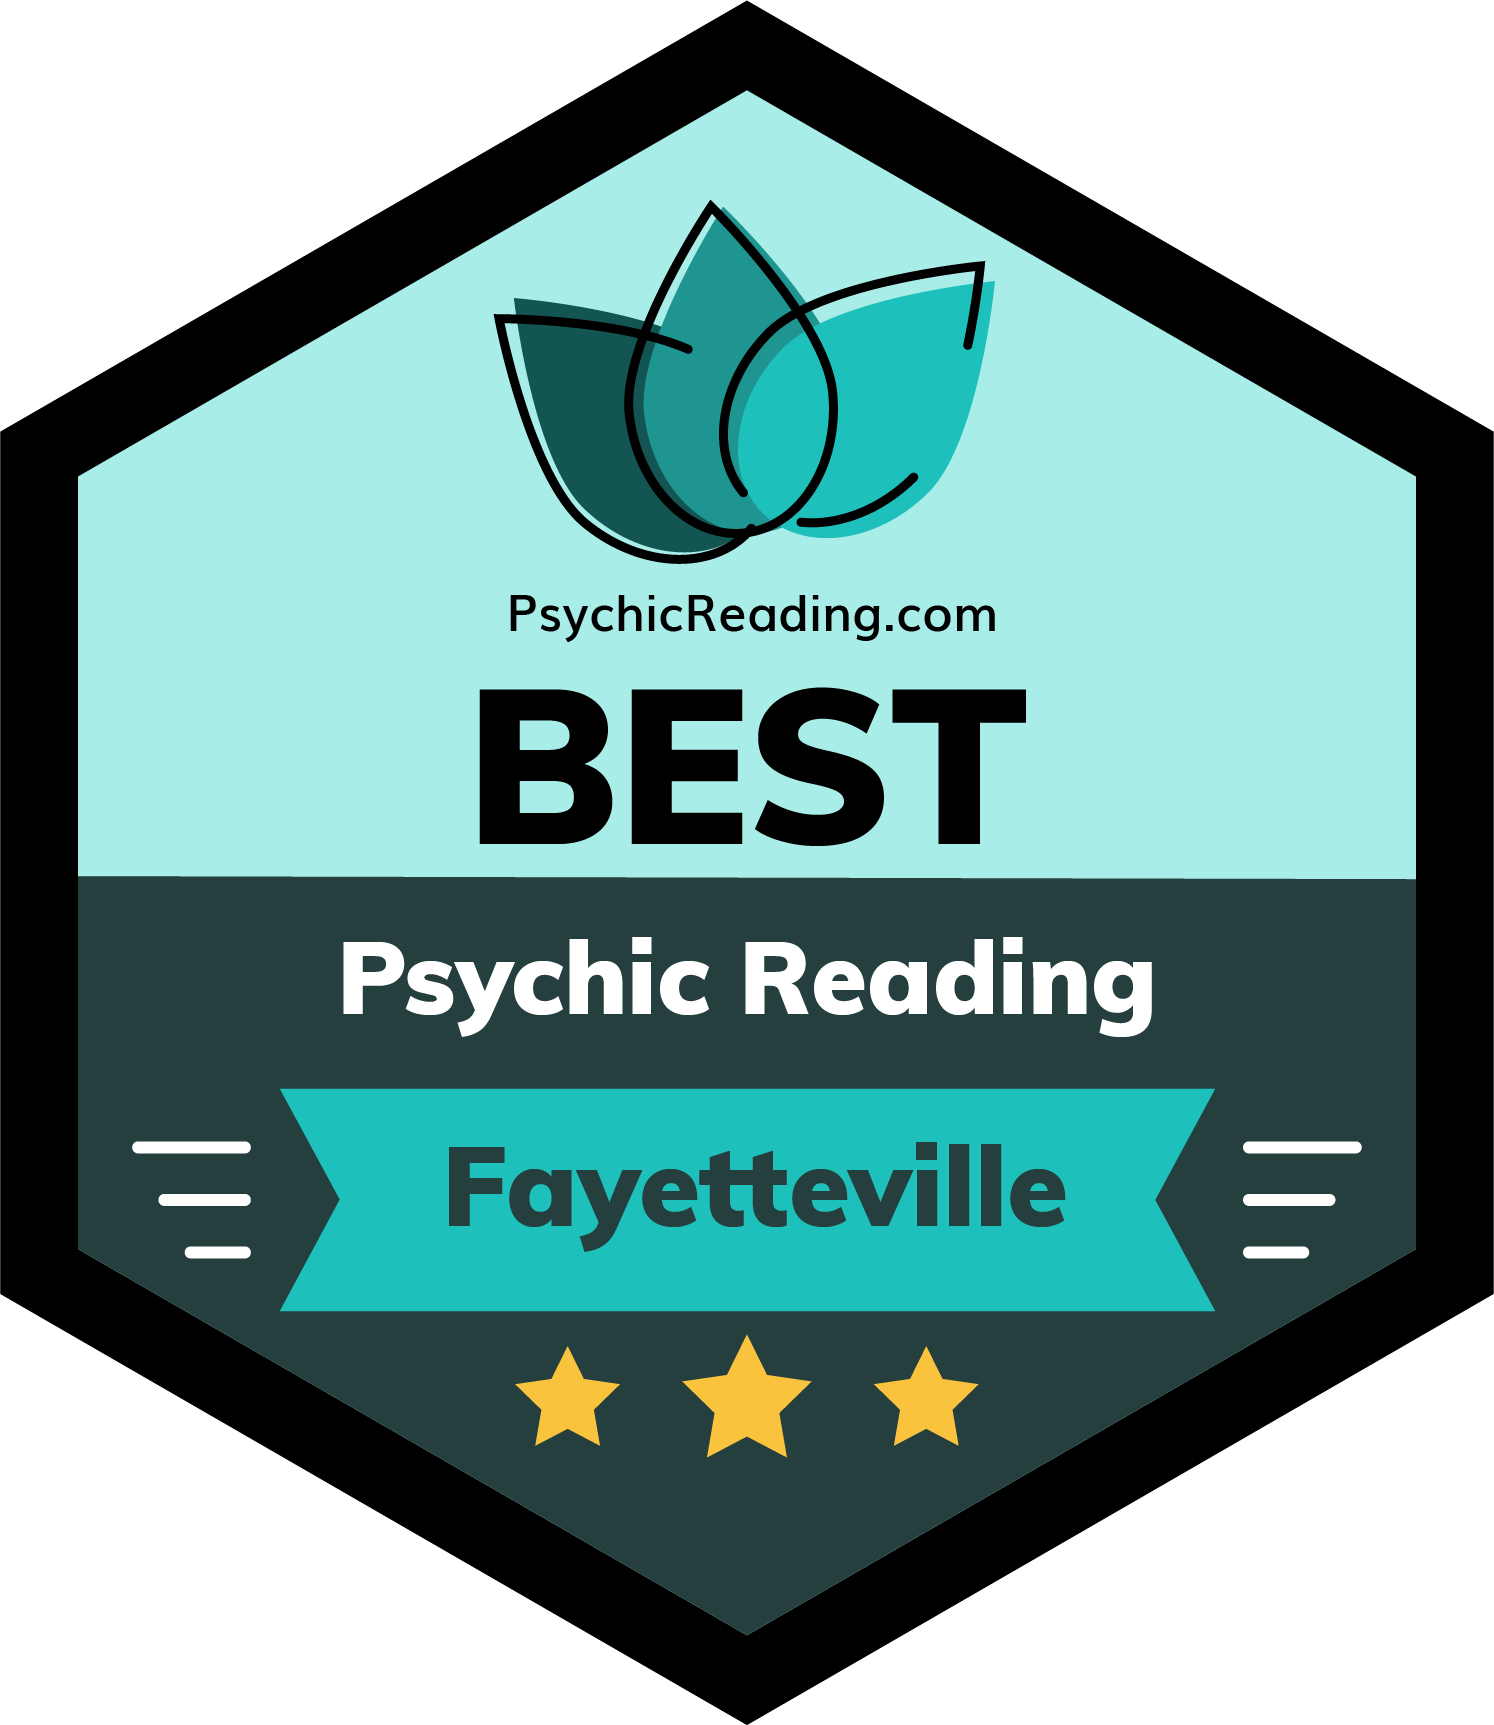 Best Psychic Reading in Fayetteville, North Carolina of 2022